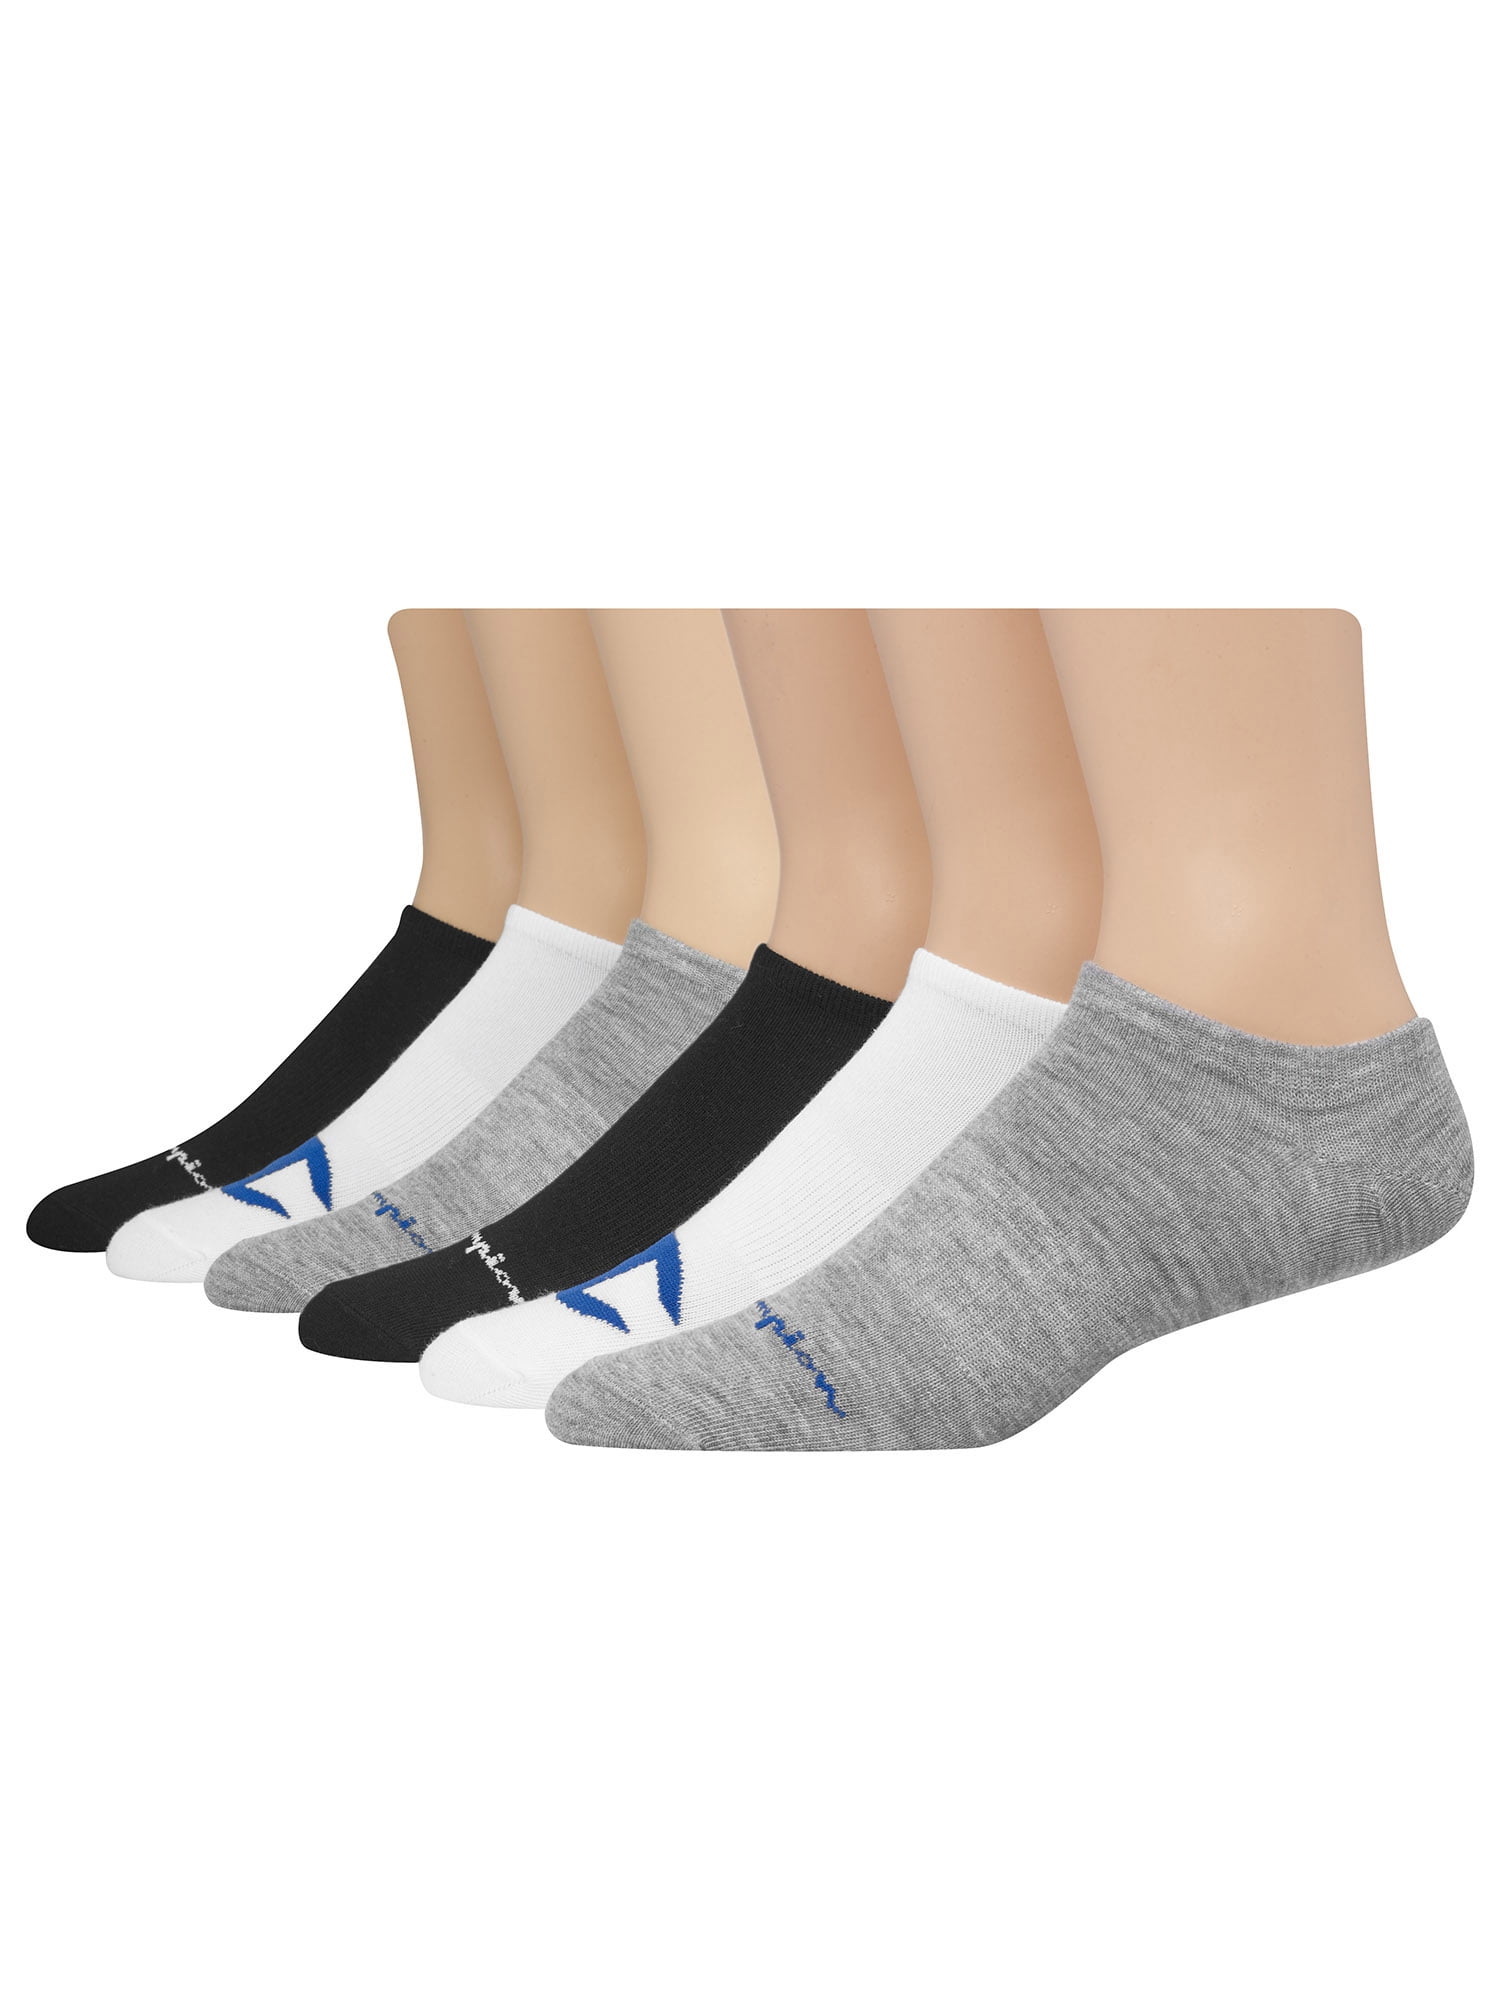 Details about   Men's Cycling Crew Socks Bicycle Sports Socks Breathable For Running Sportswear 